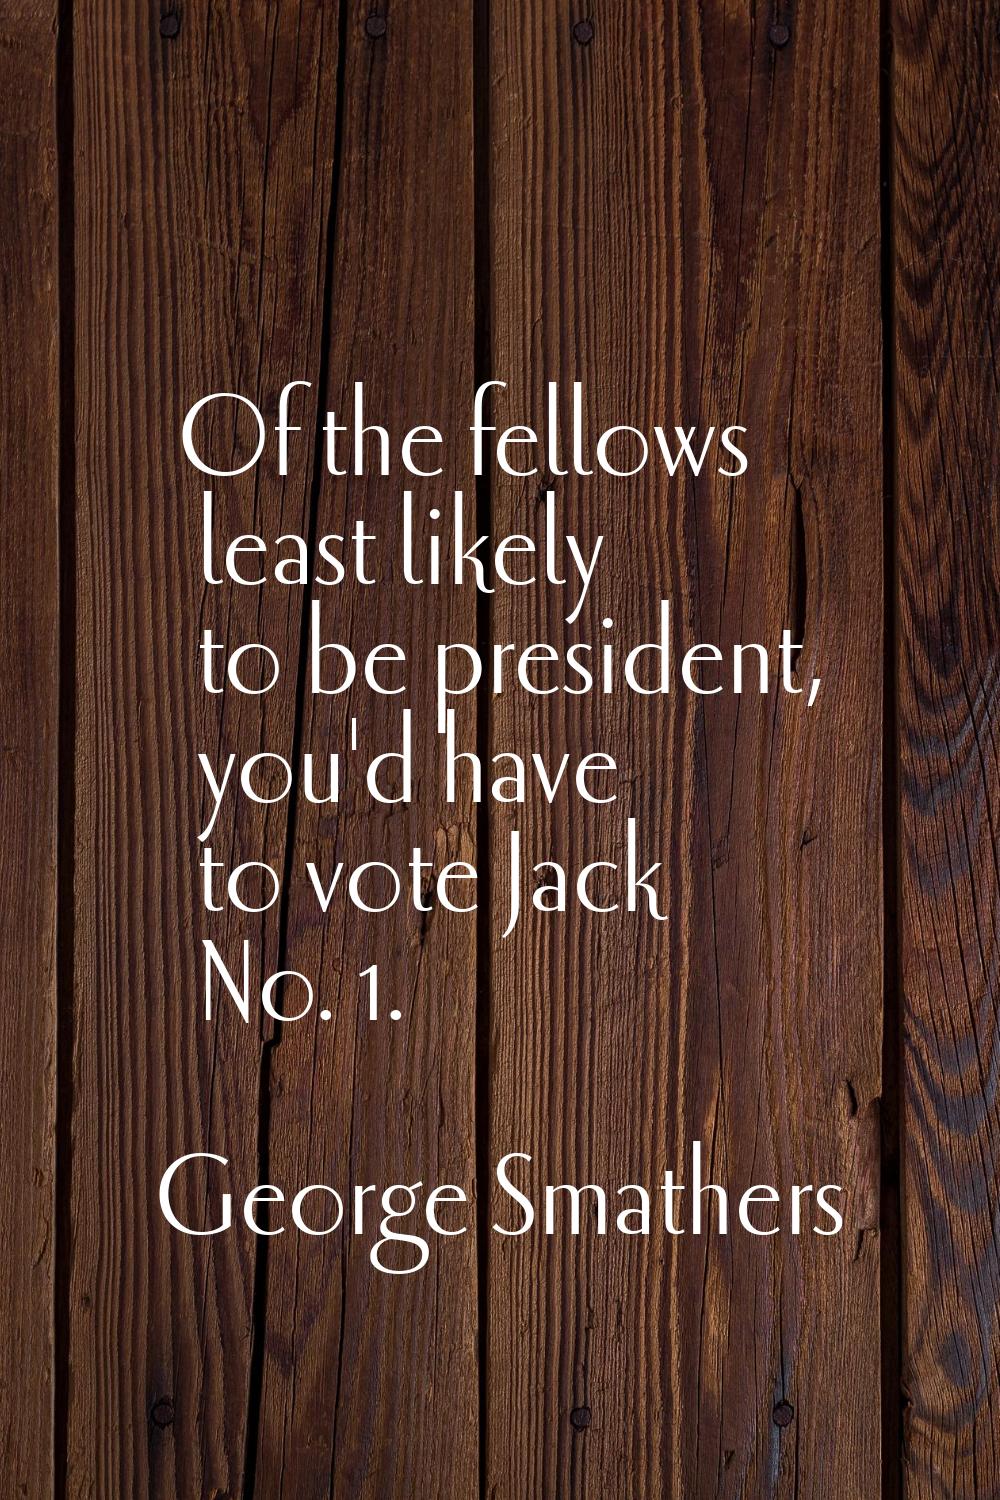 Of the fellows least likely to be president, you'd have to vote Jack No. 1.